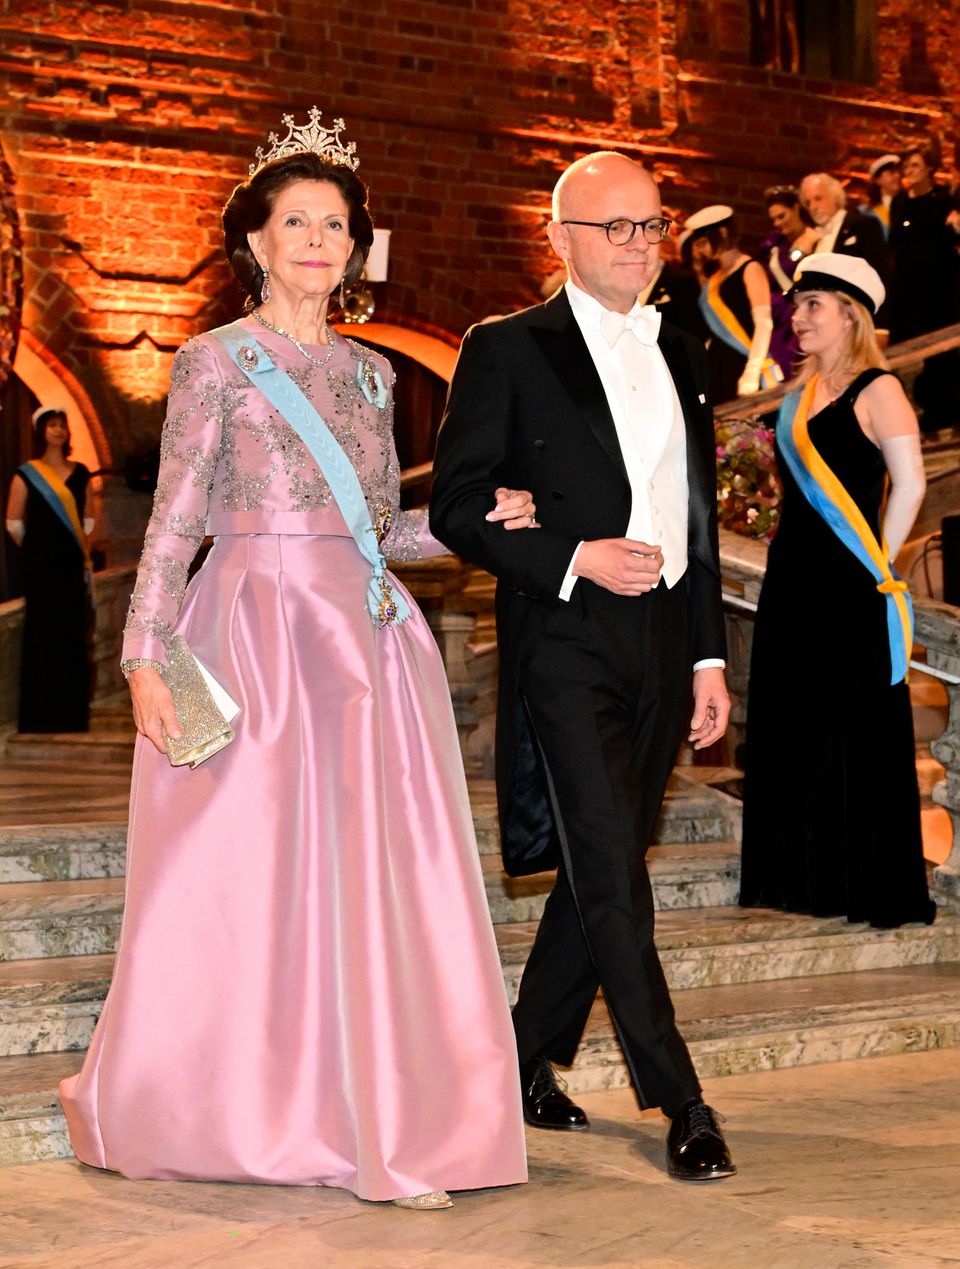 Queen Silvia has a lot of sparkles going on.  Tiara meets glitter clutch and rhinestone decoration. 